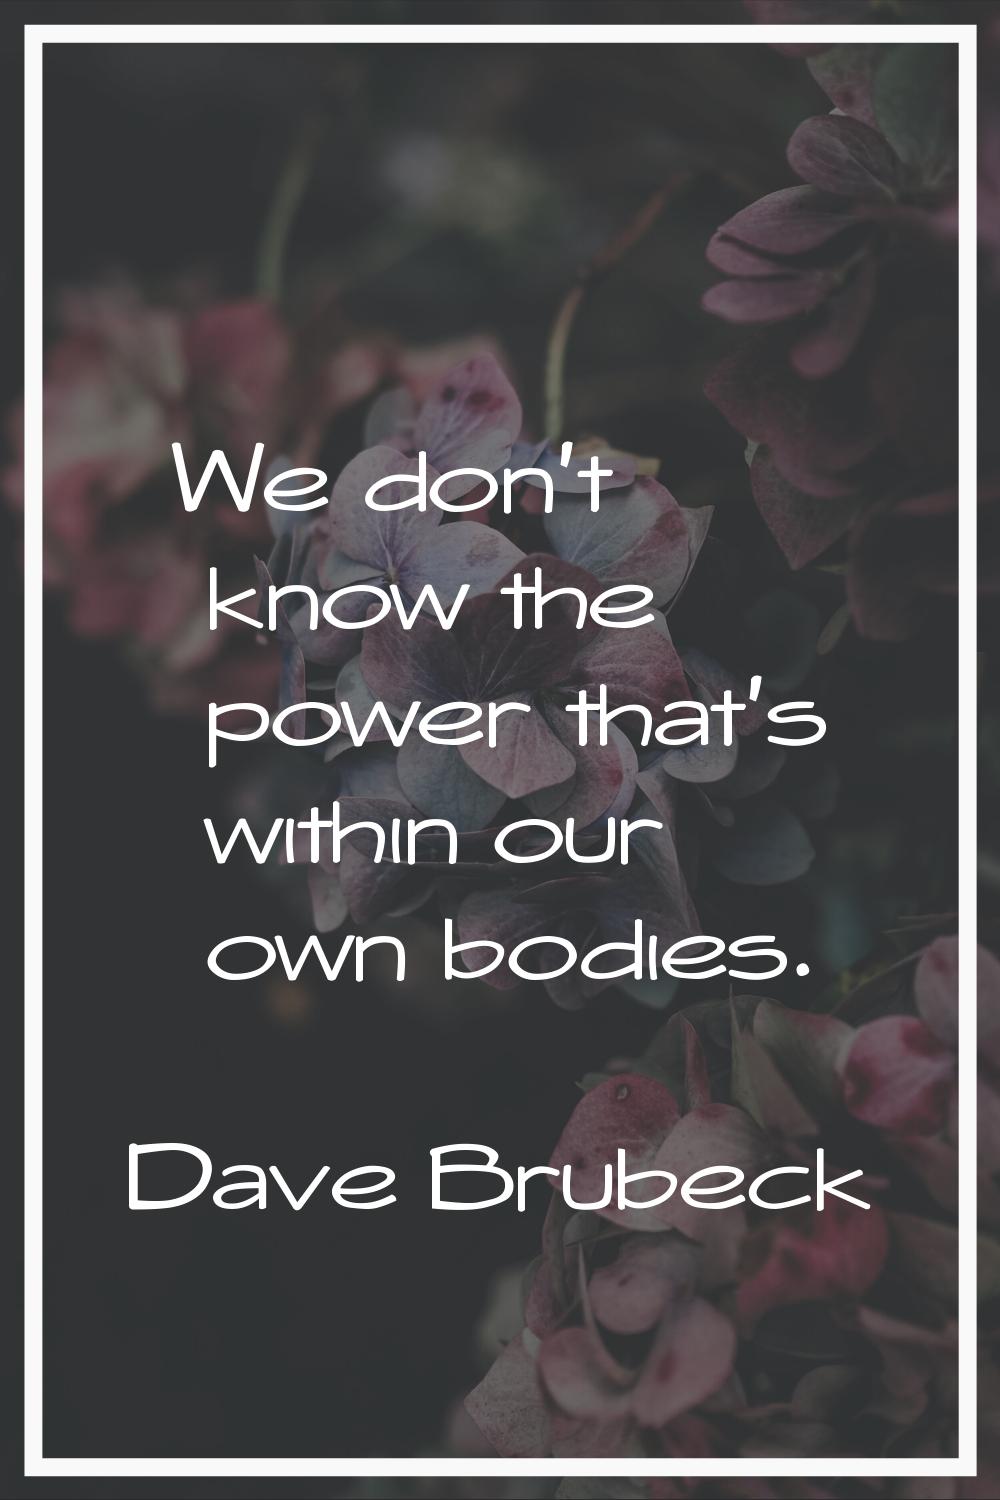 We don't know the power that's within our own bodies.